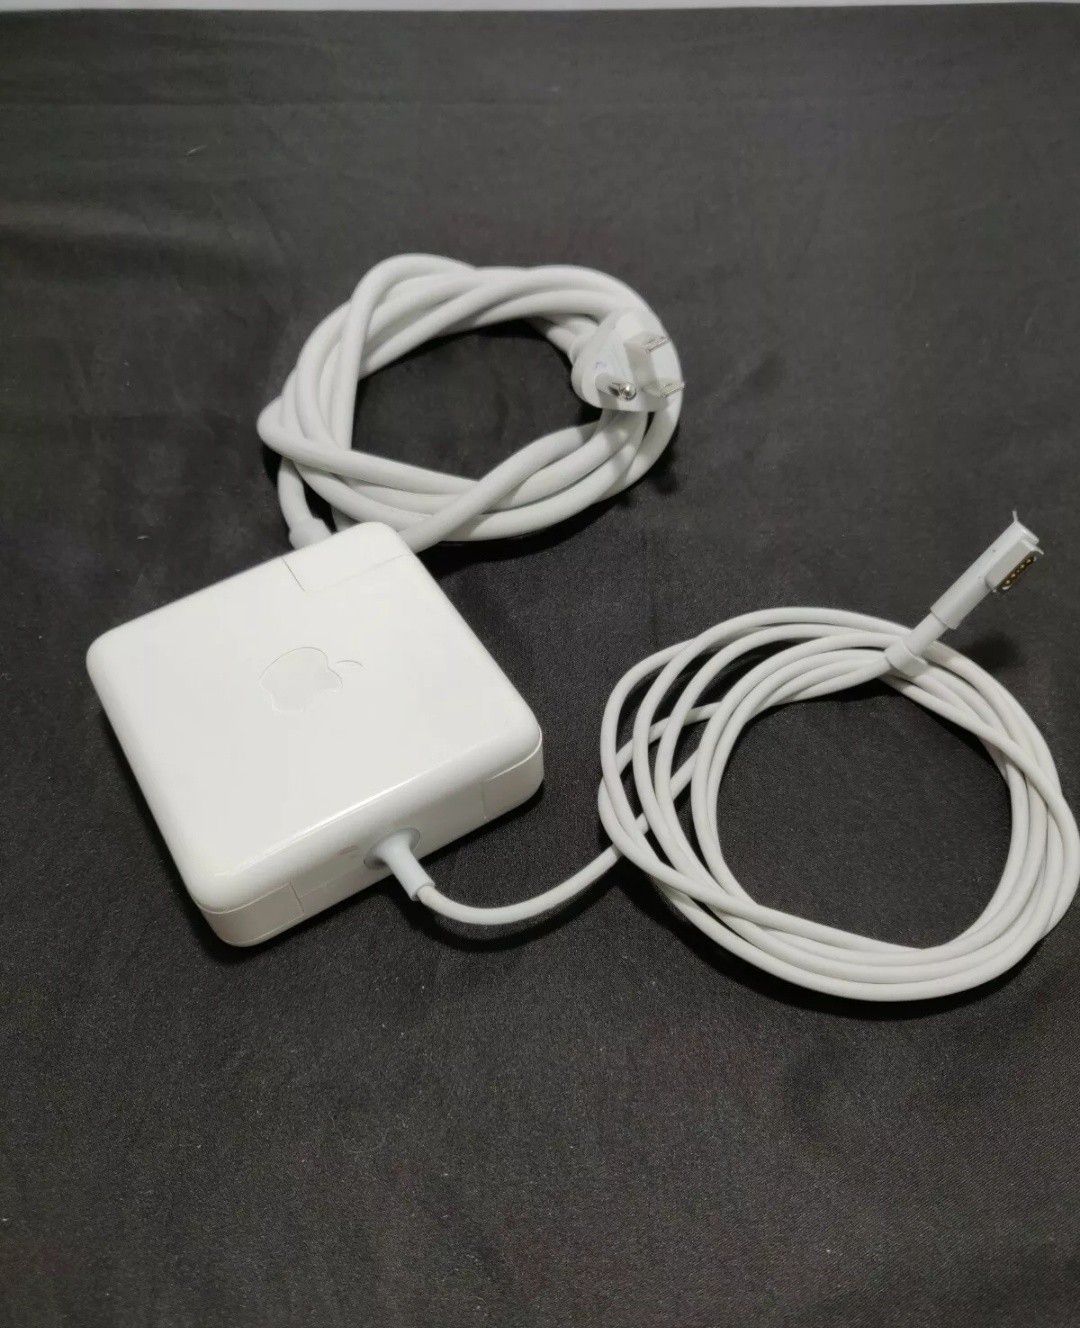 Genuine Apple 85W White MagSafe Power Adapter Model A1290 (used). Condition is Used. Comes with 6' power cord.